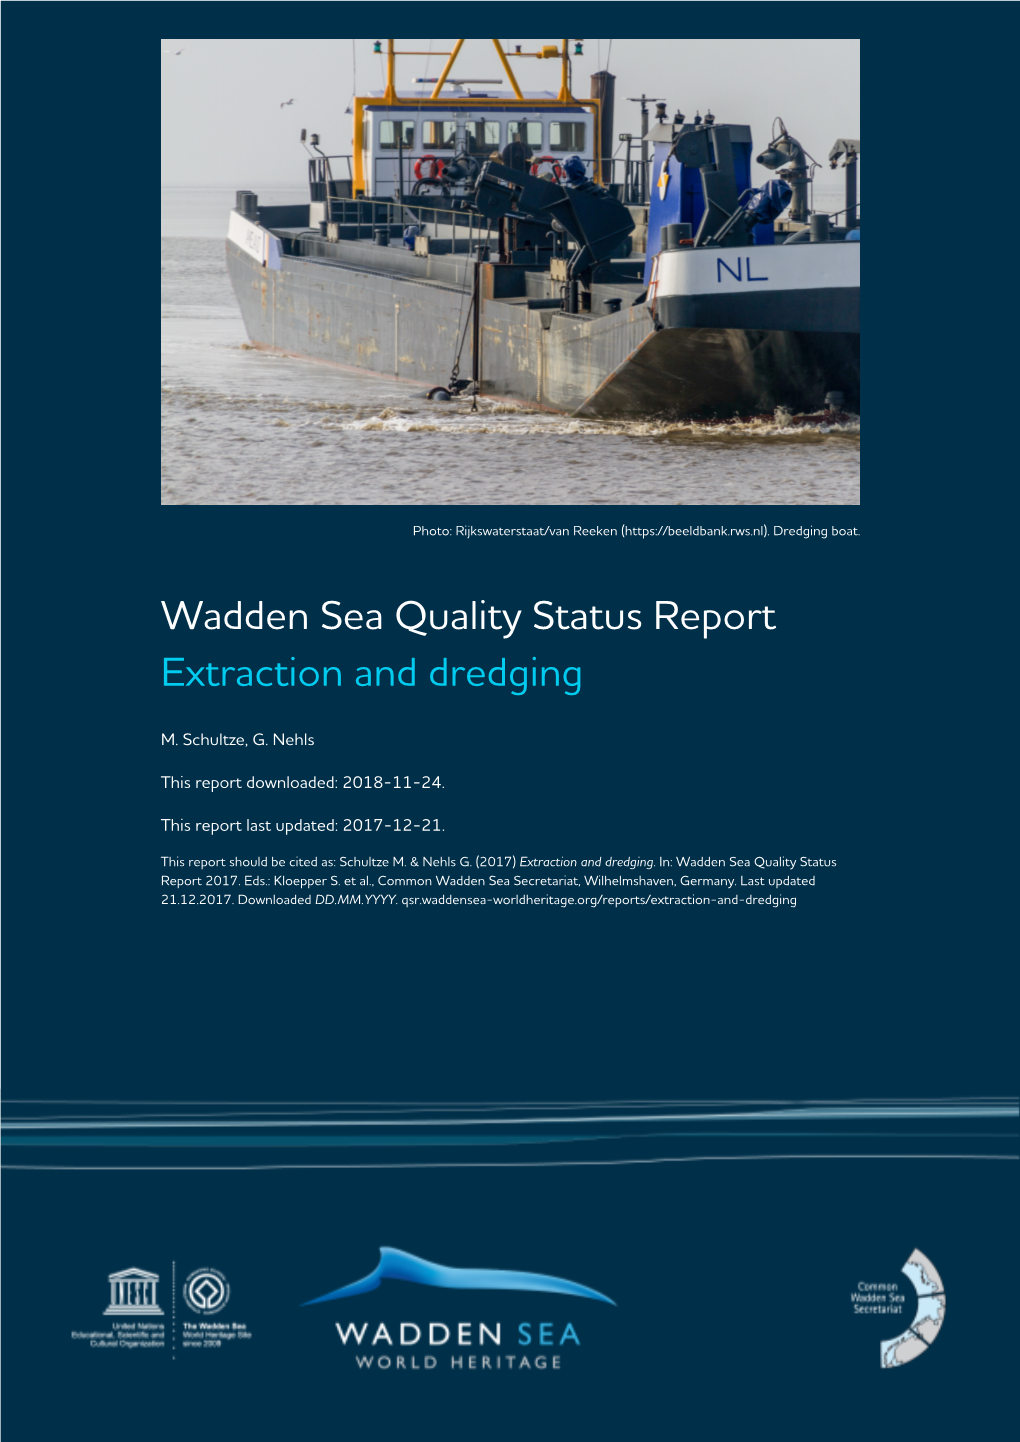 Wadden Sea Quality Status Report Extraction and Dredging